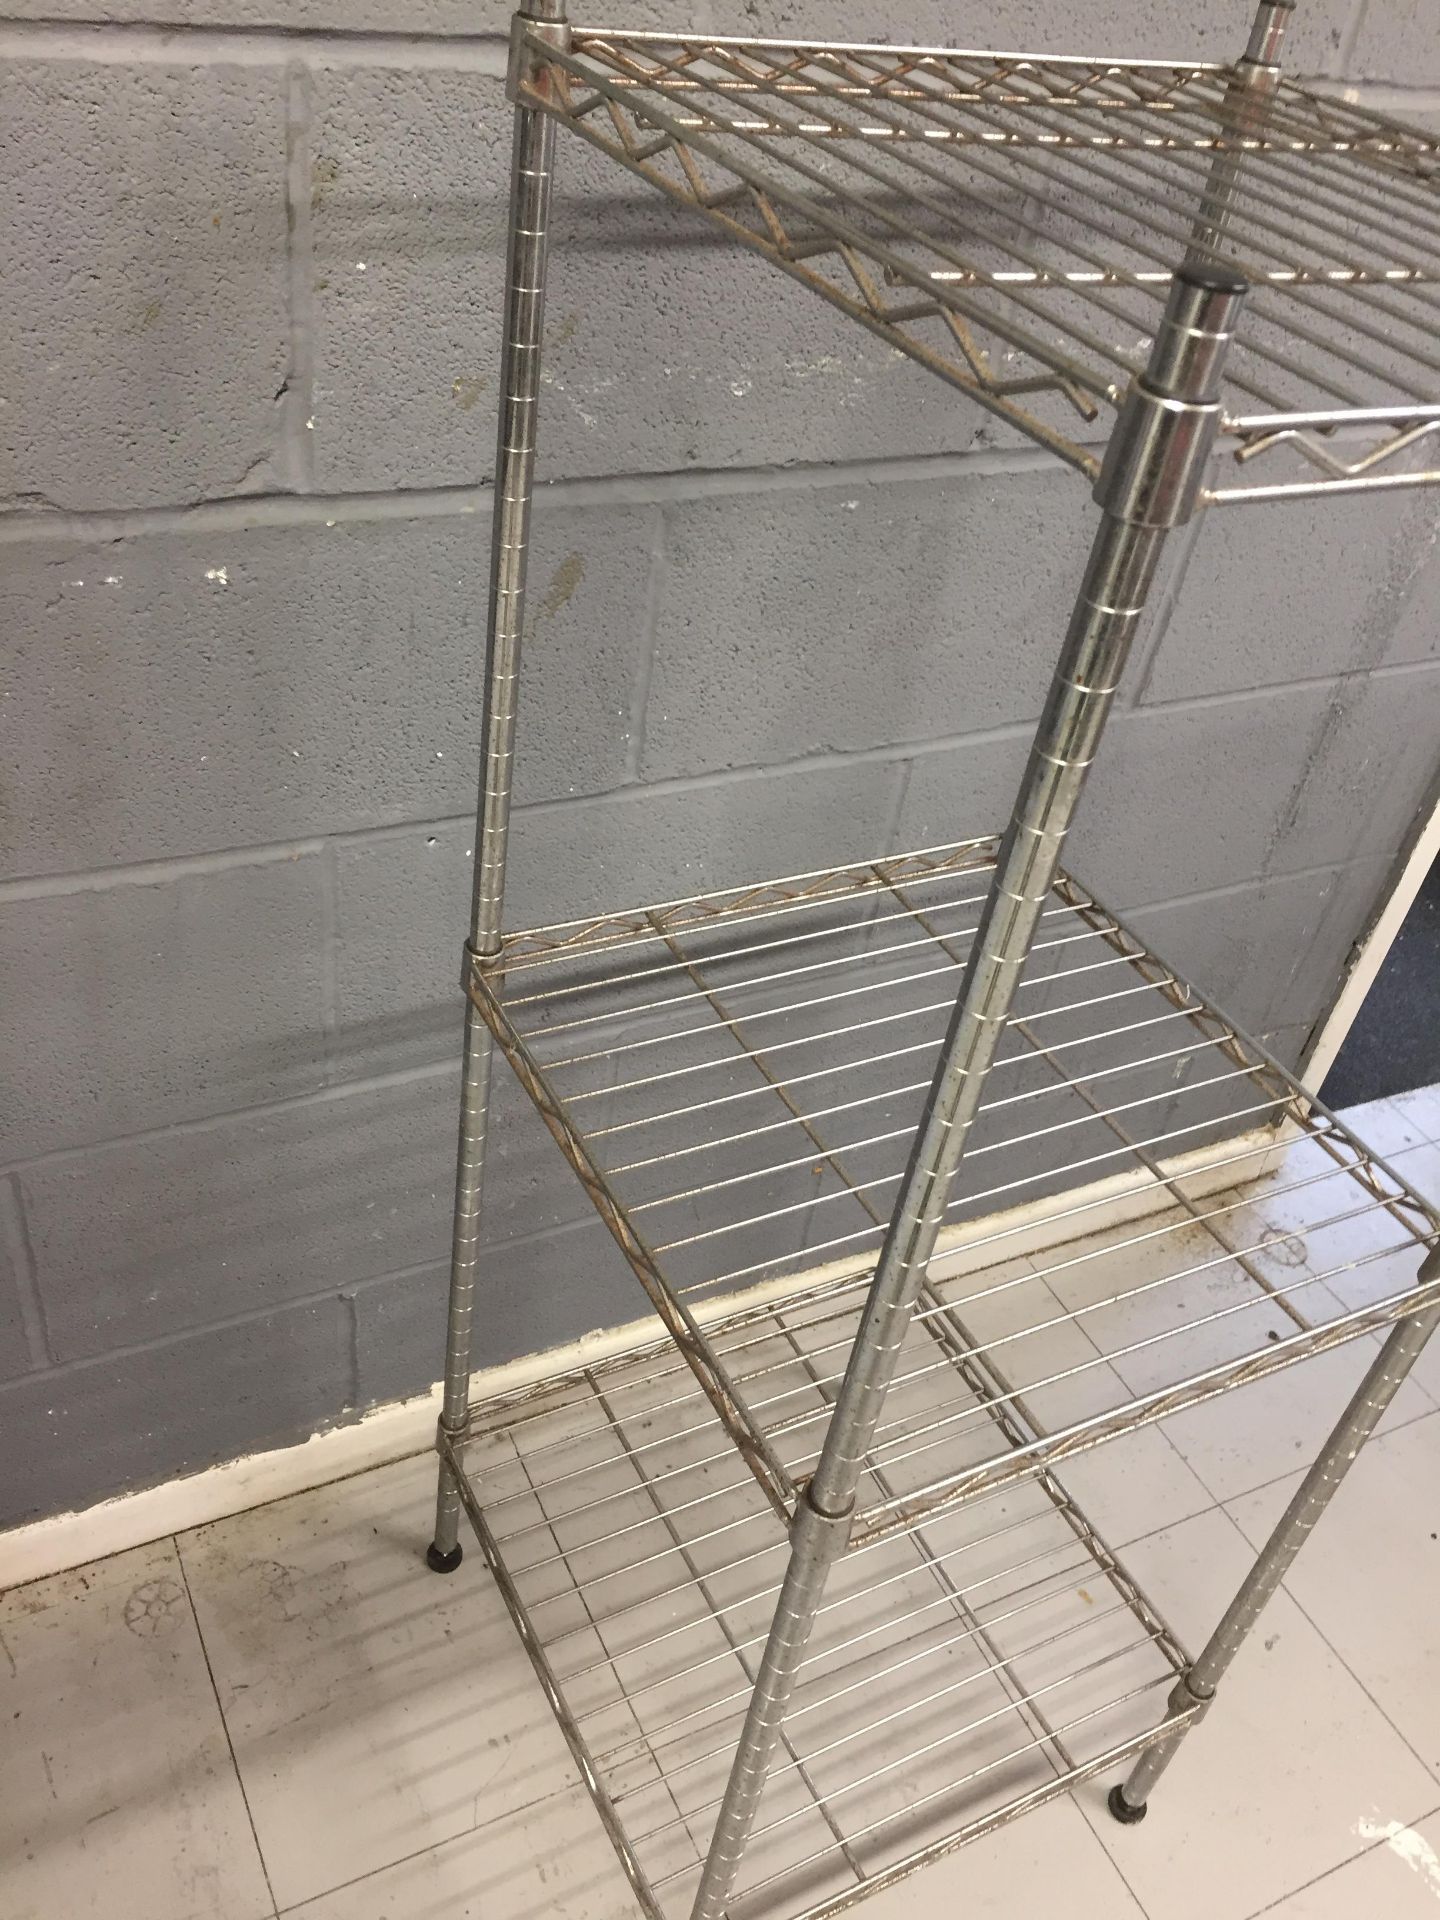 Stainless Steel Shelving Unit - Image 2 of 3